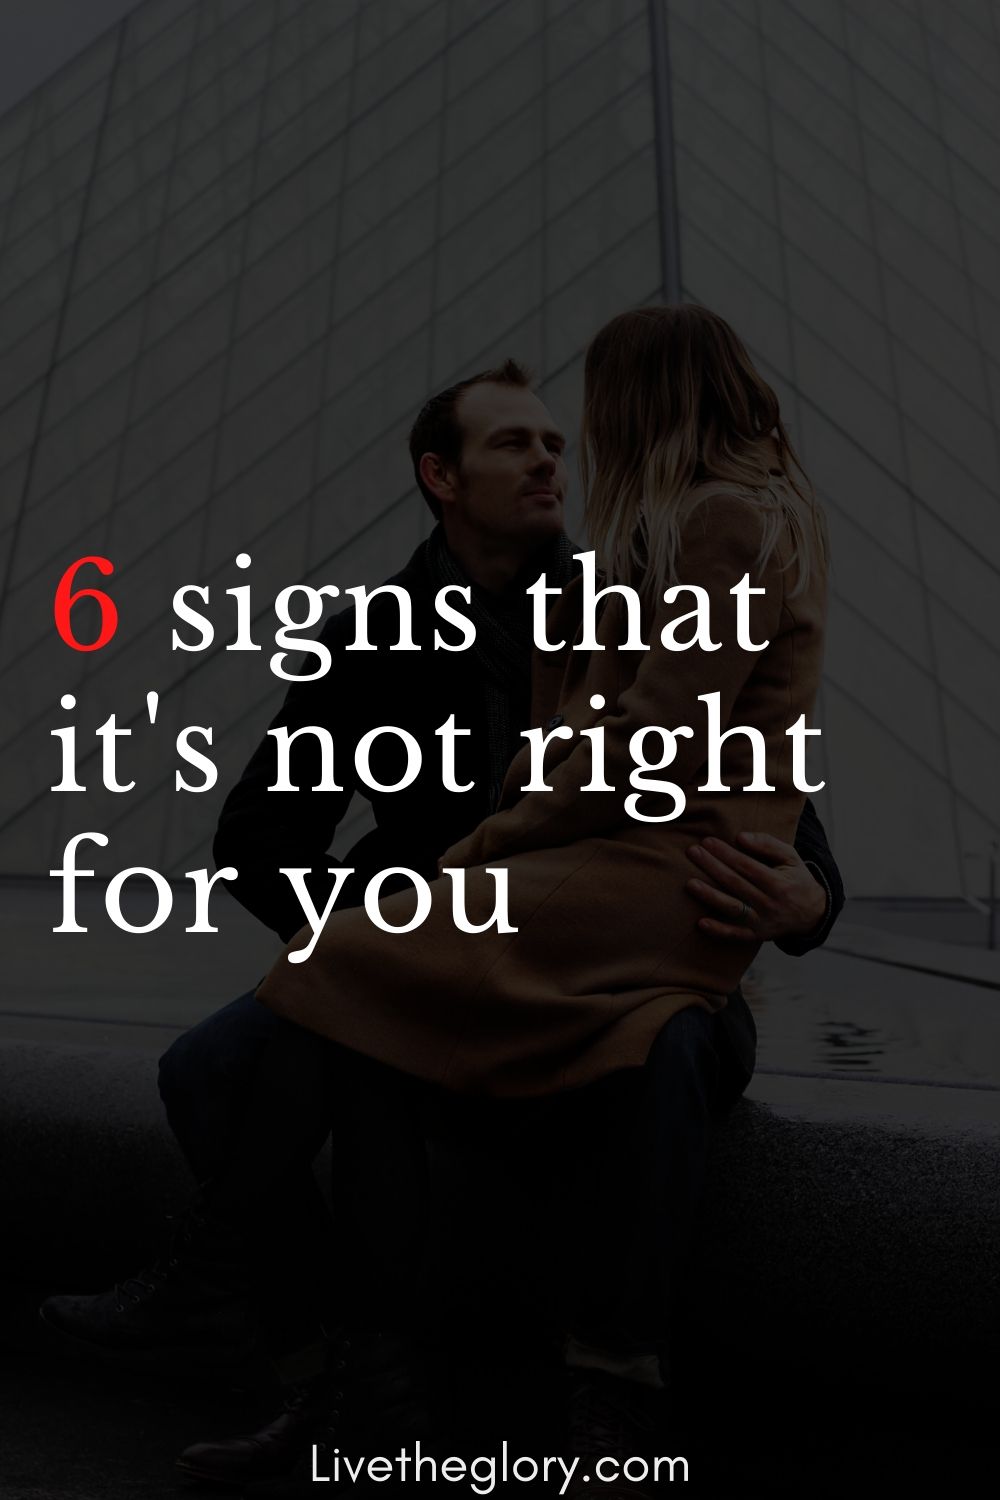 6 signs that he is not right for you - Live the glory